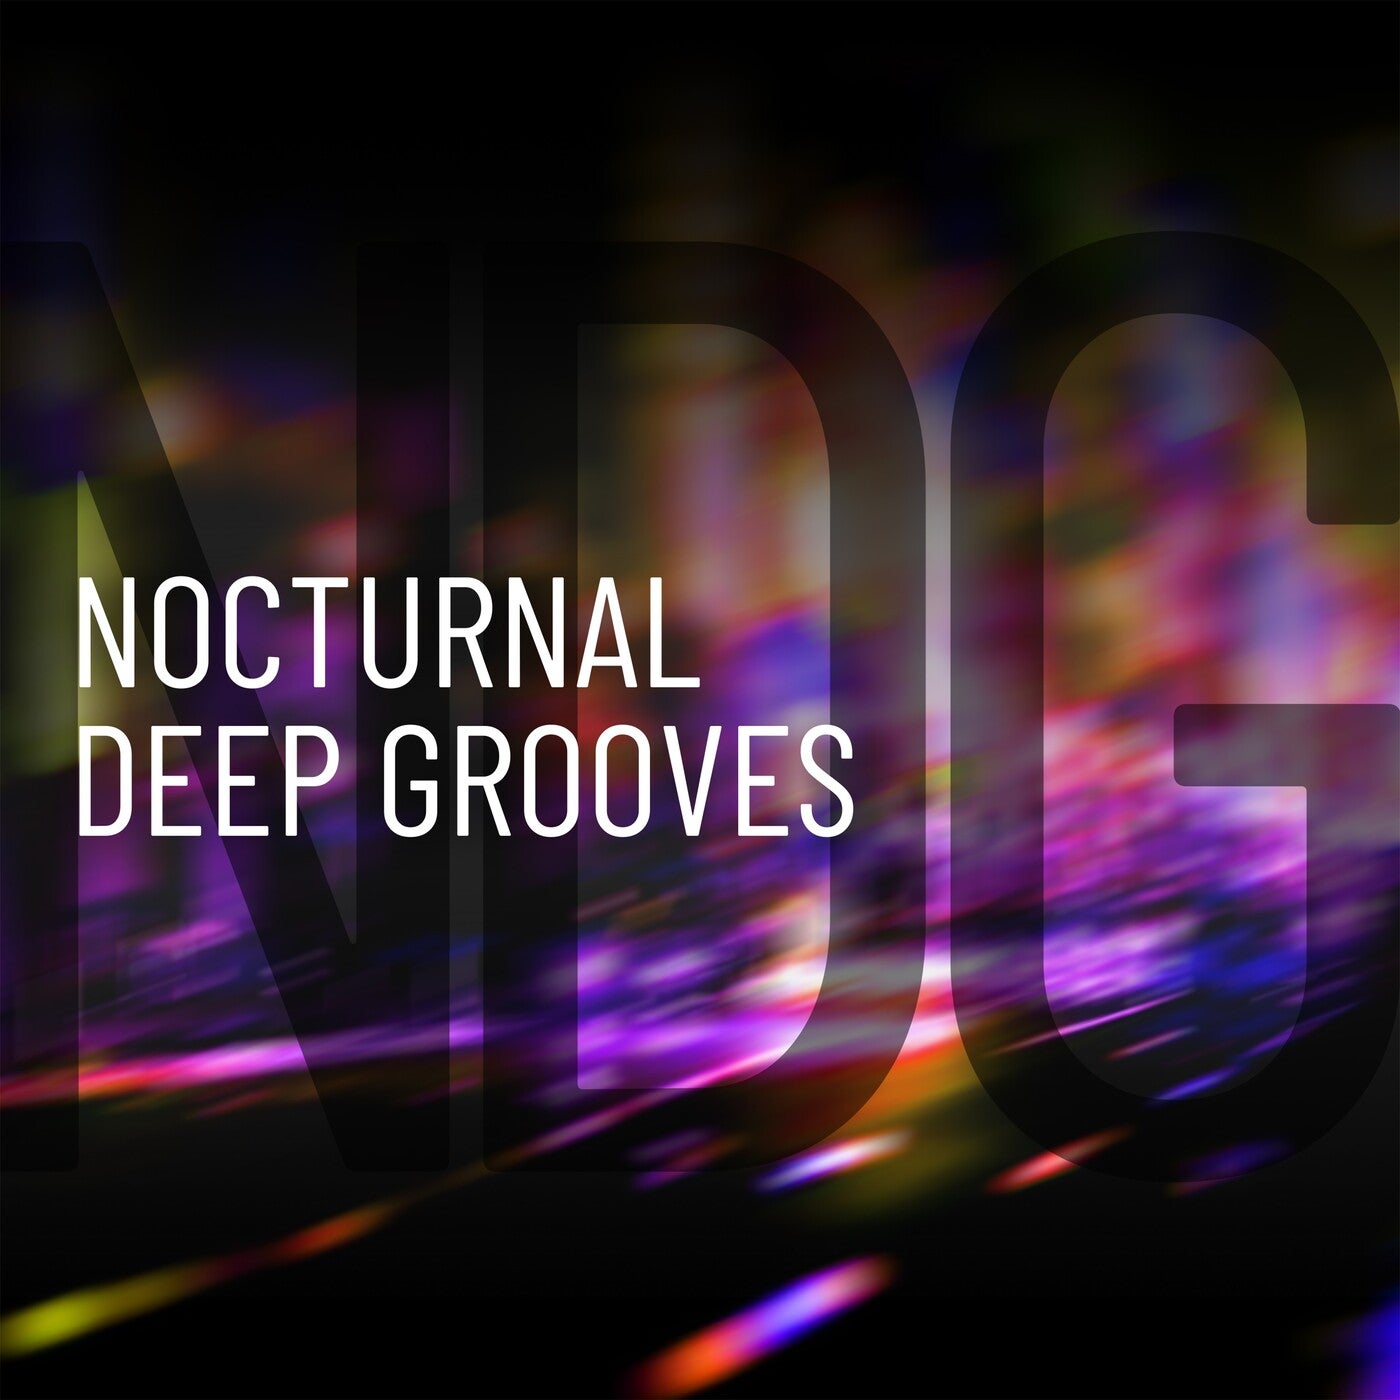 Nocturnal Deep Grooves